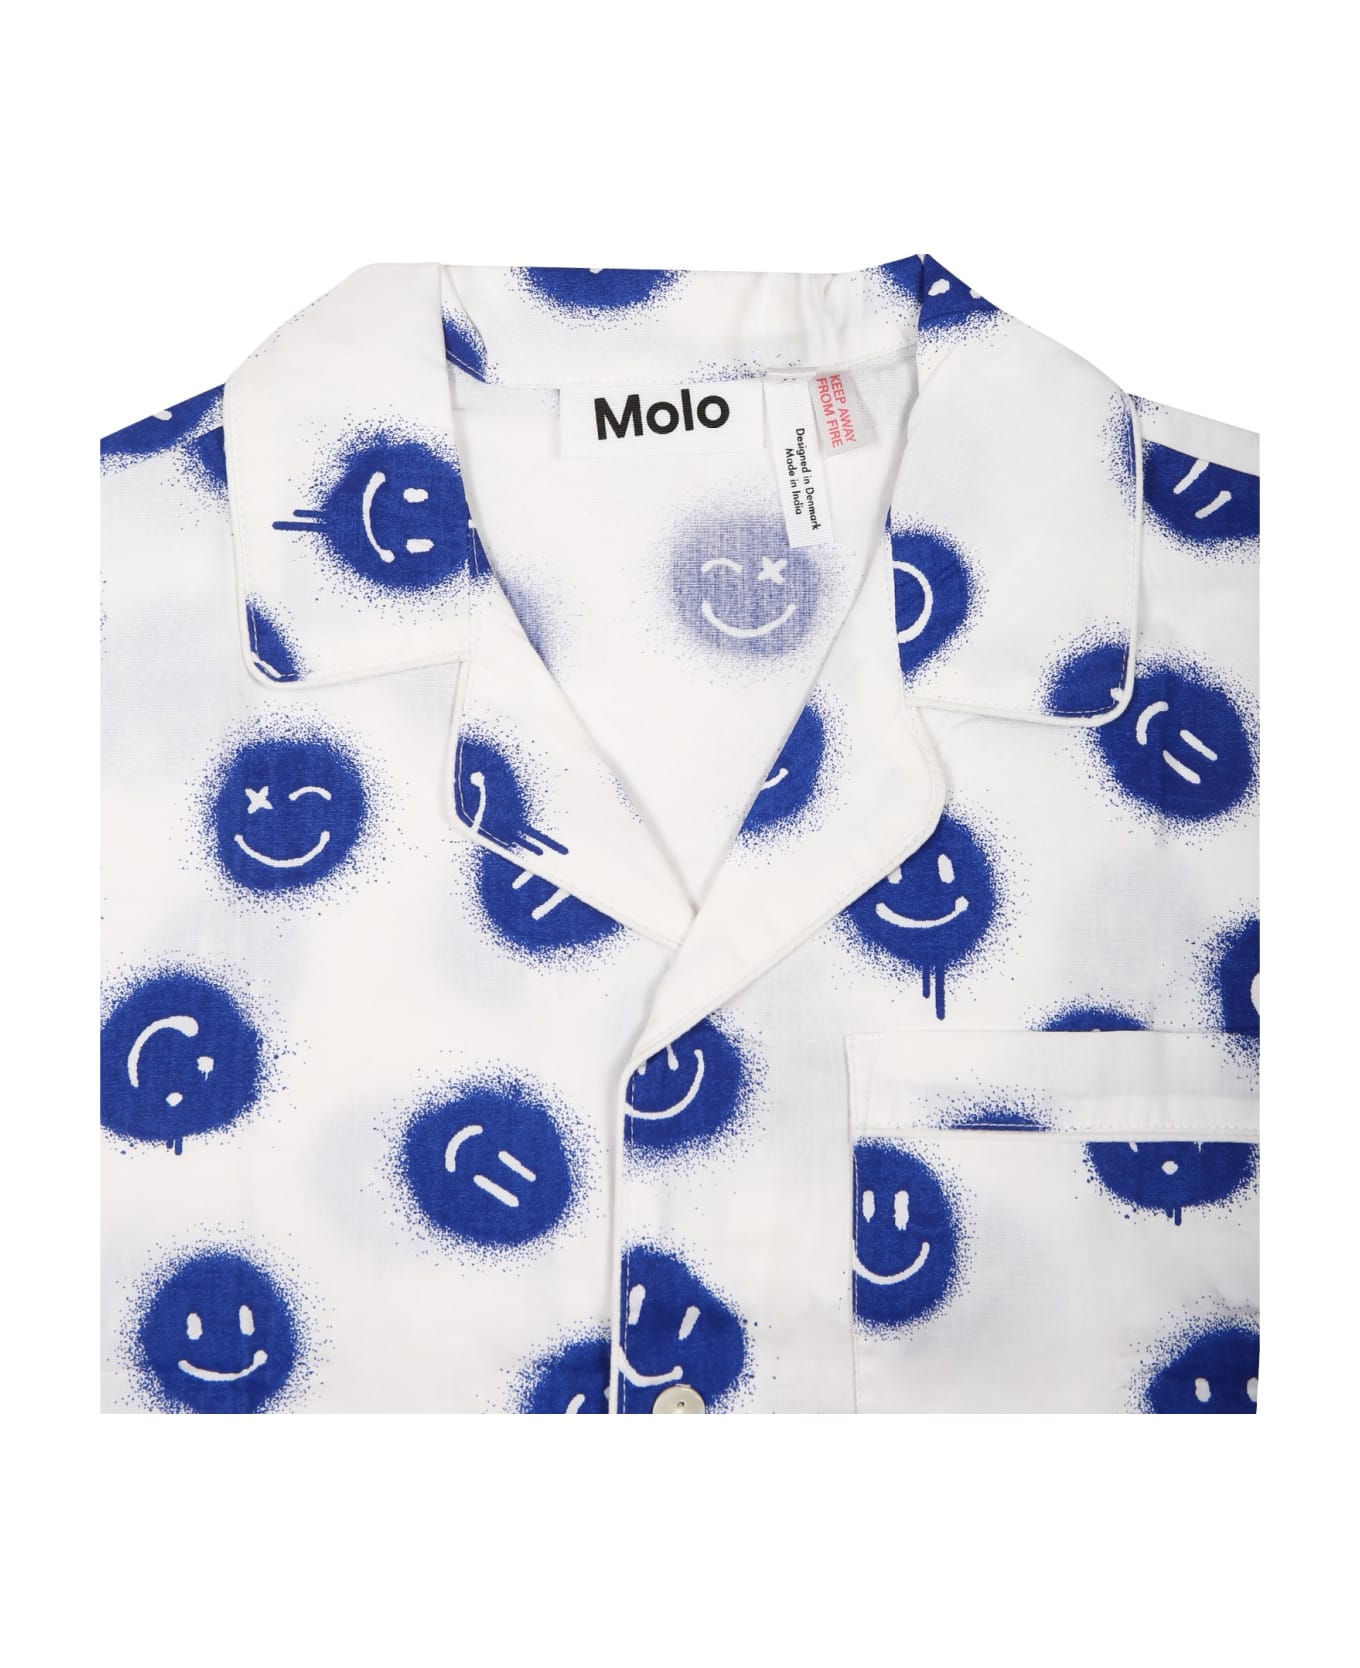 Molo White Pajamas For Kids With Smiley - Blue ジャンプスーツ